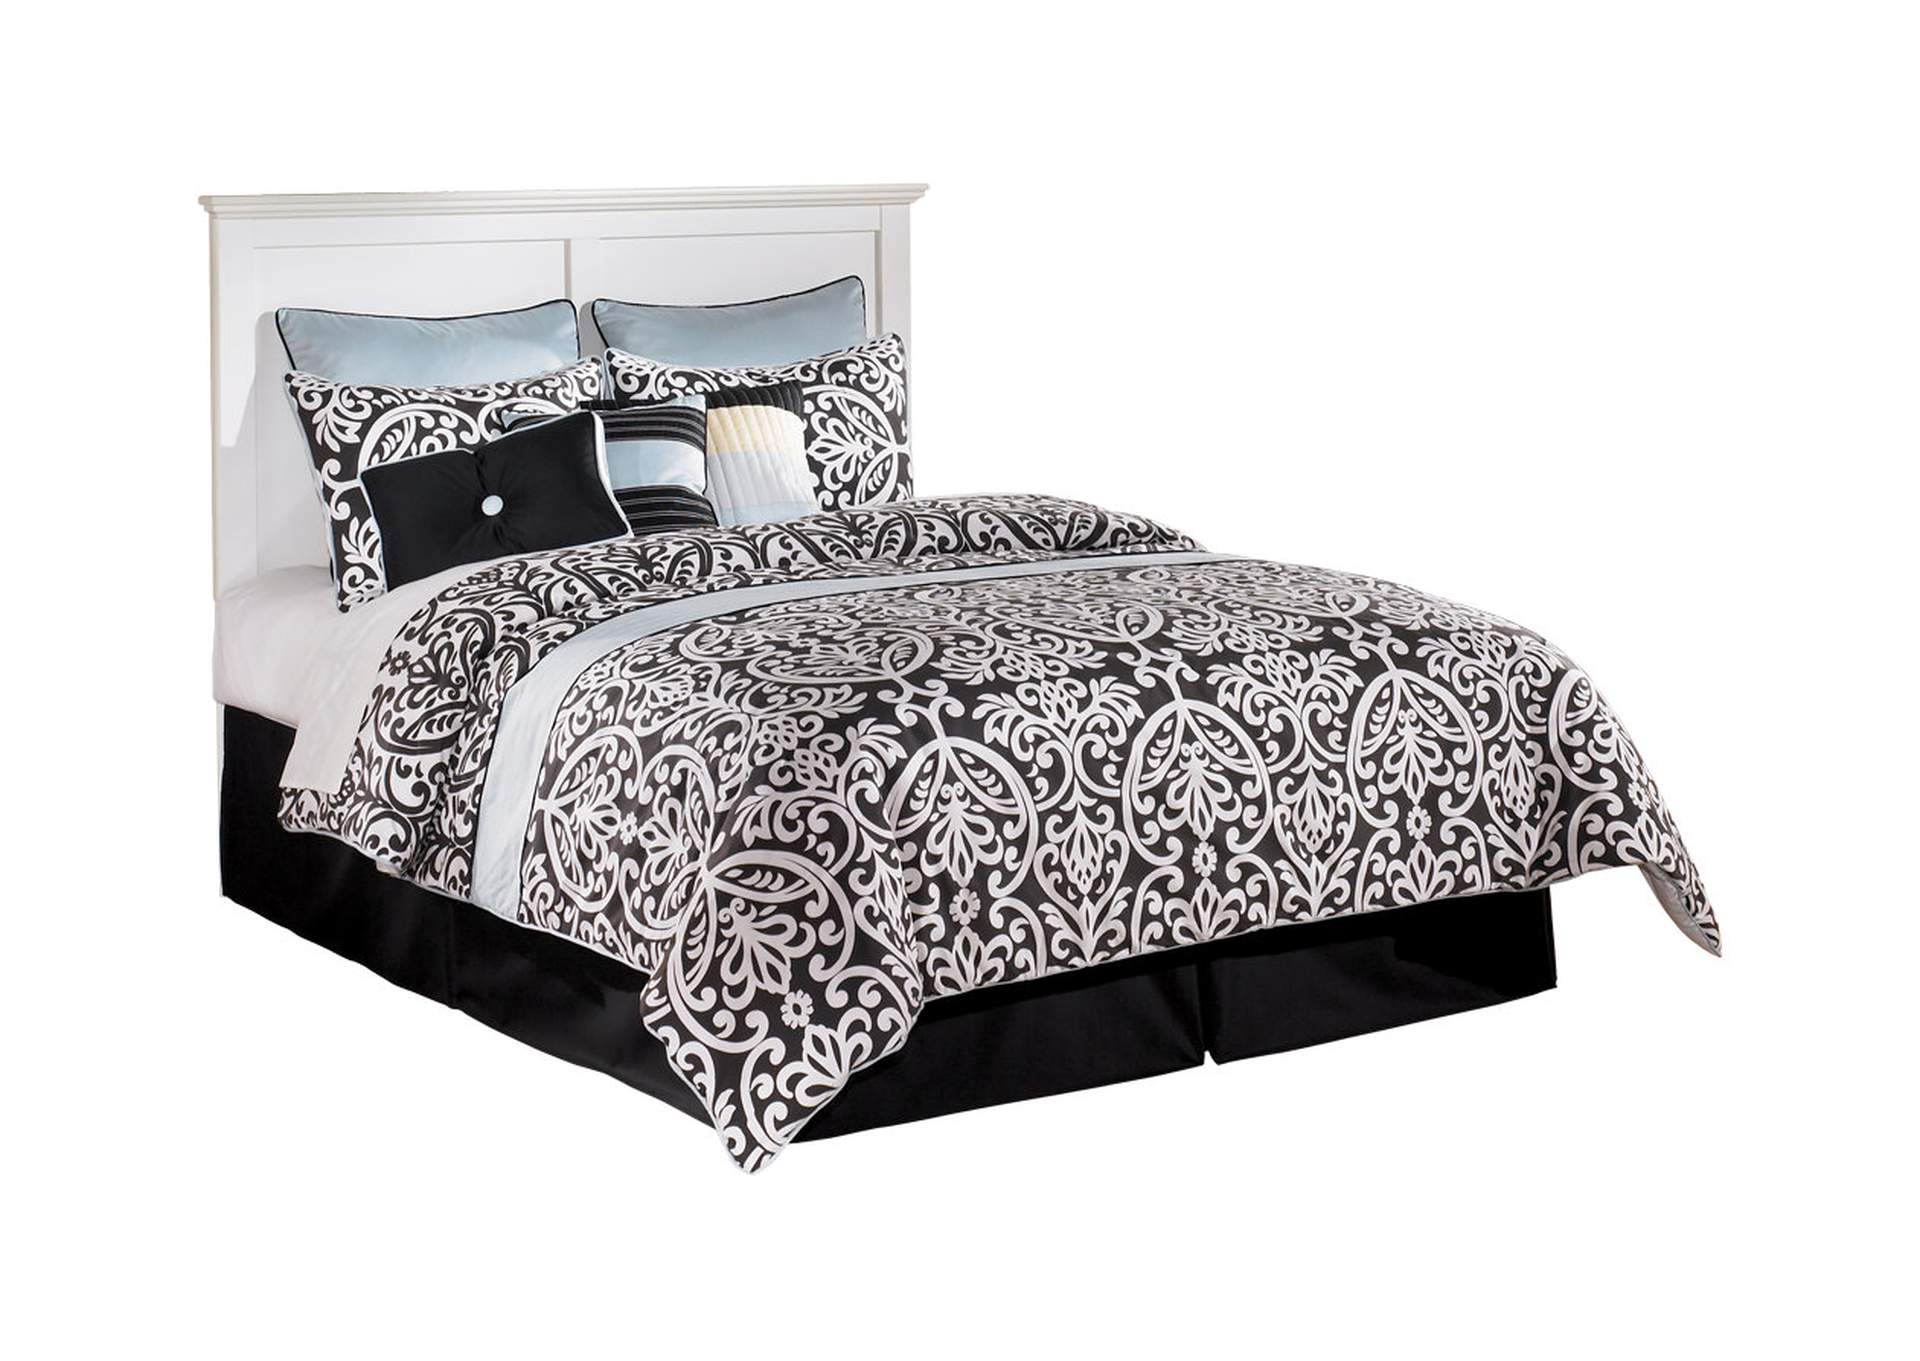 Bostwick Shoals Queen Panel Bed, Dresser, Mirror and Nightstand,Signature Design By Ashley